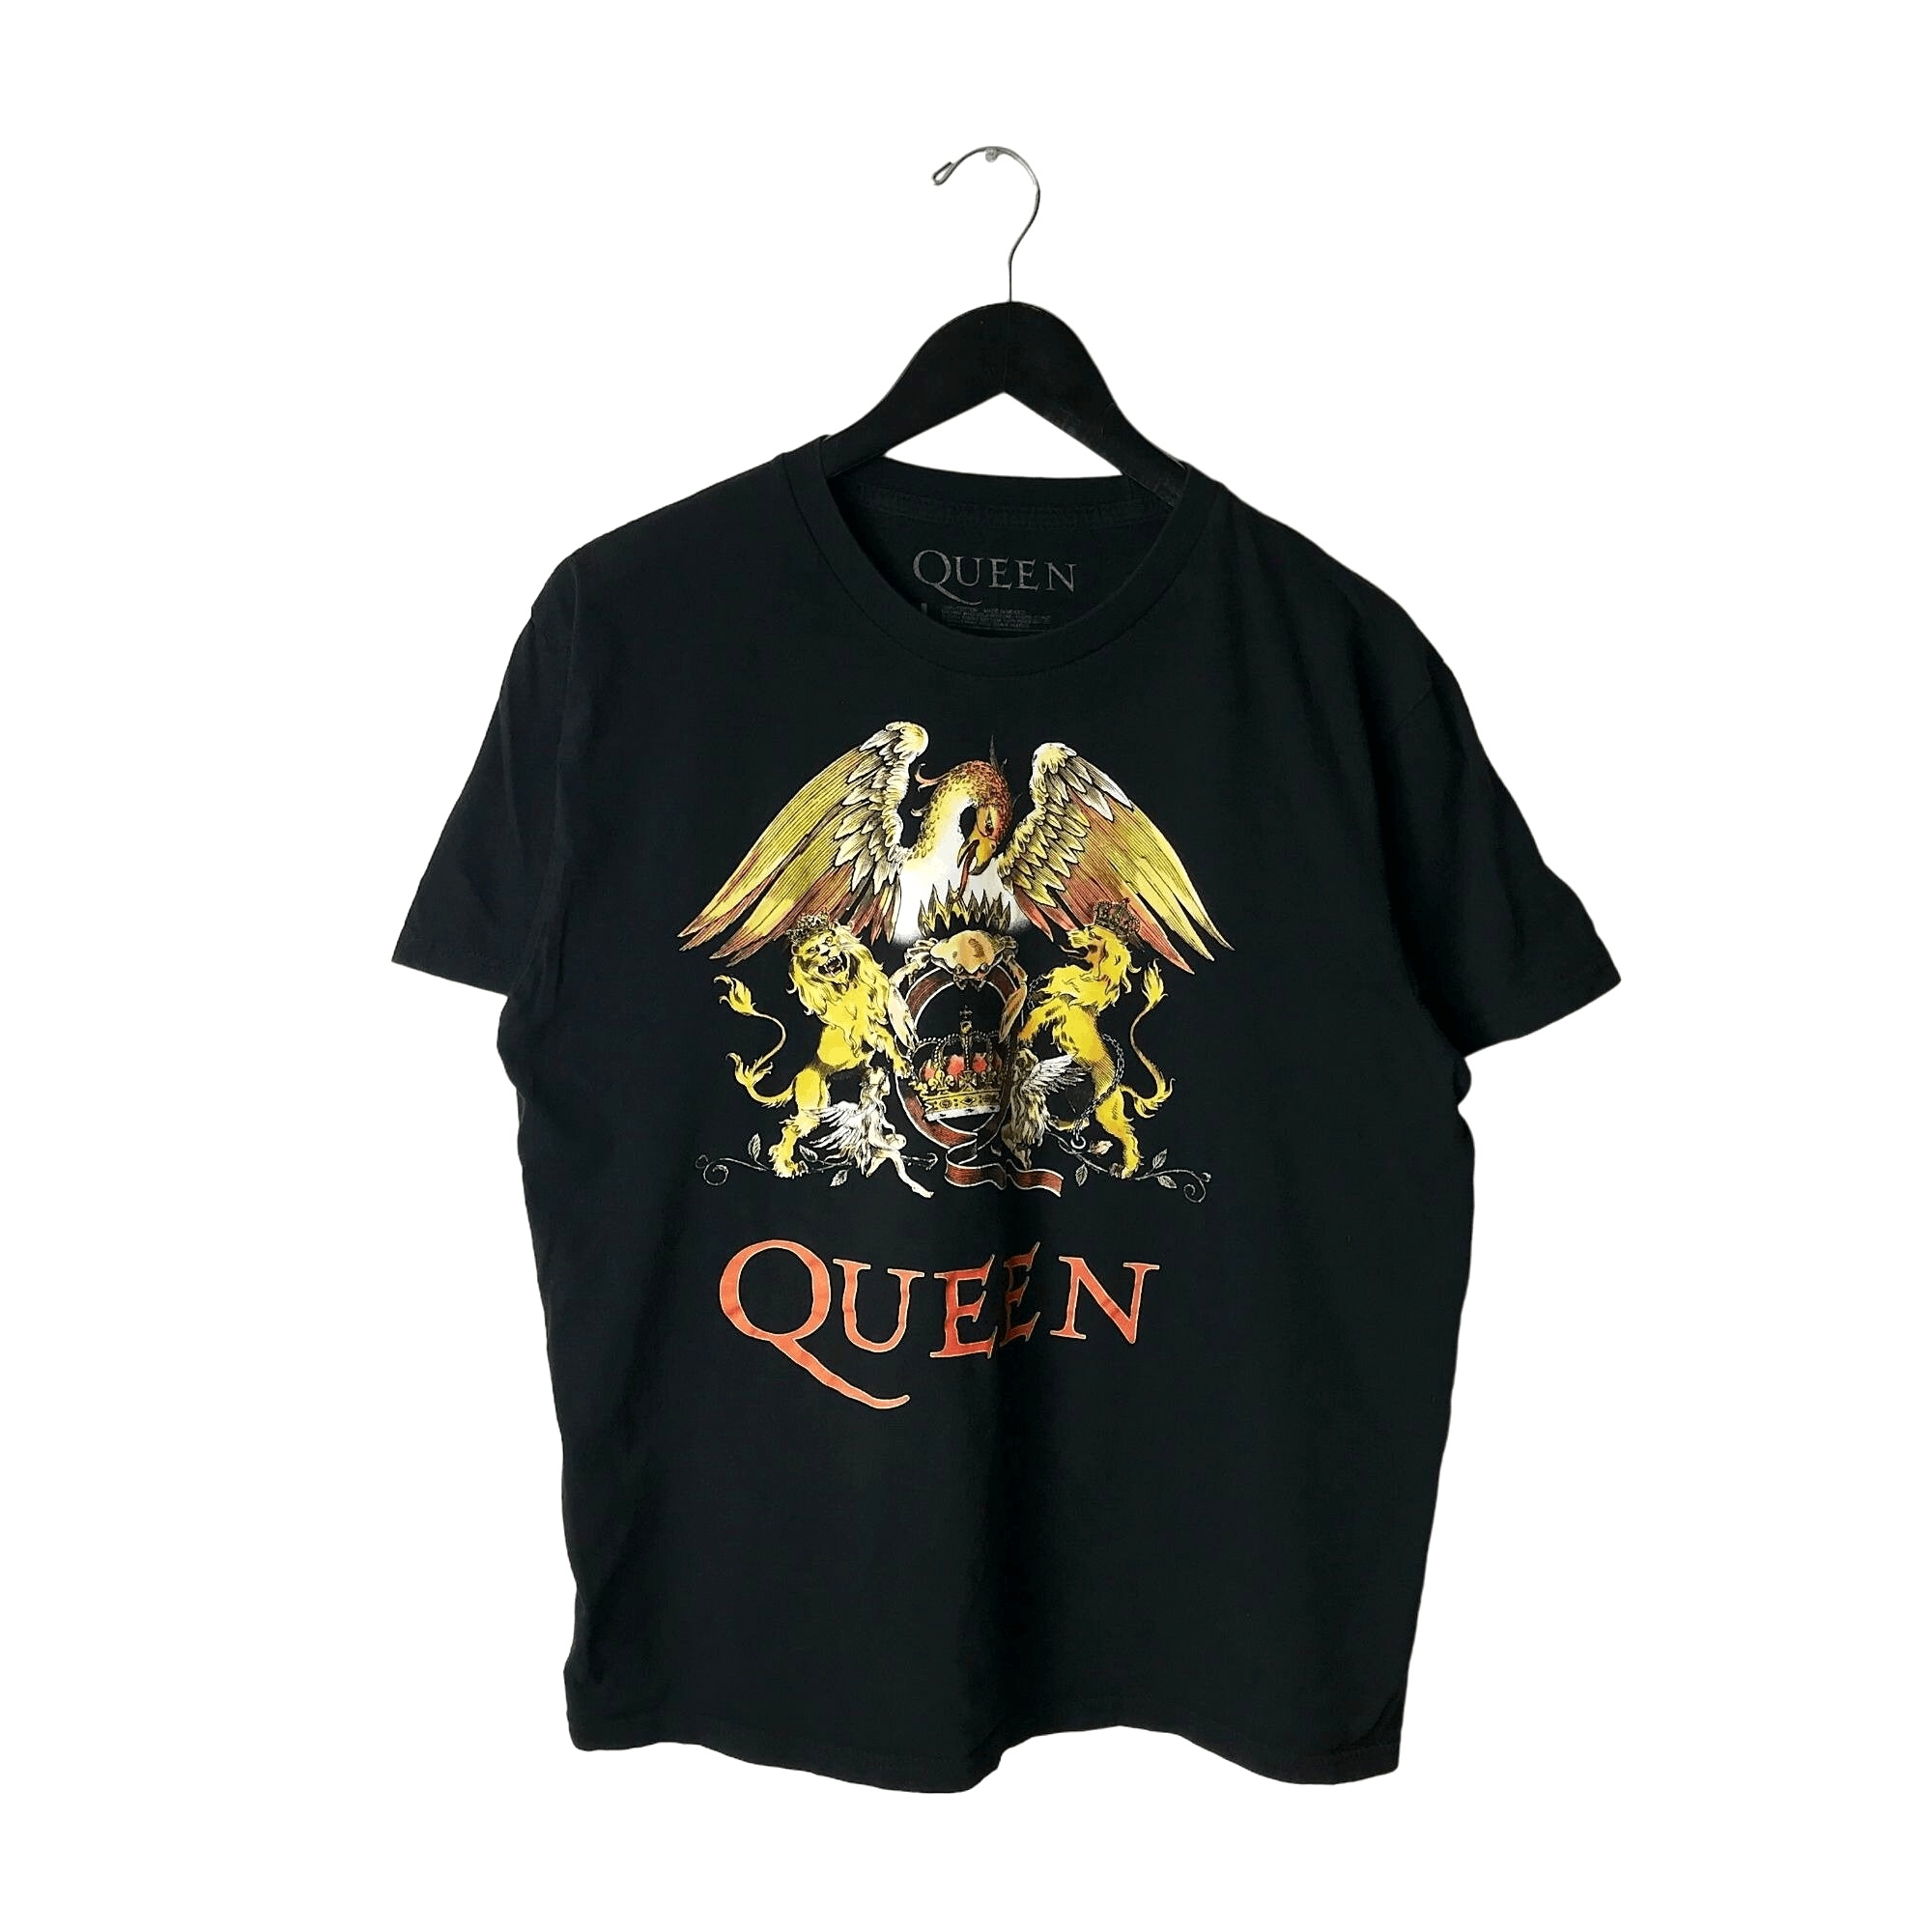 Urban Outfitters Queen Music Band T Shirt Emblem Logo Adult Black Large ...